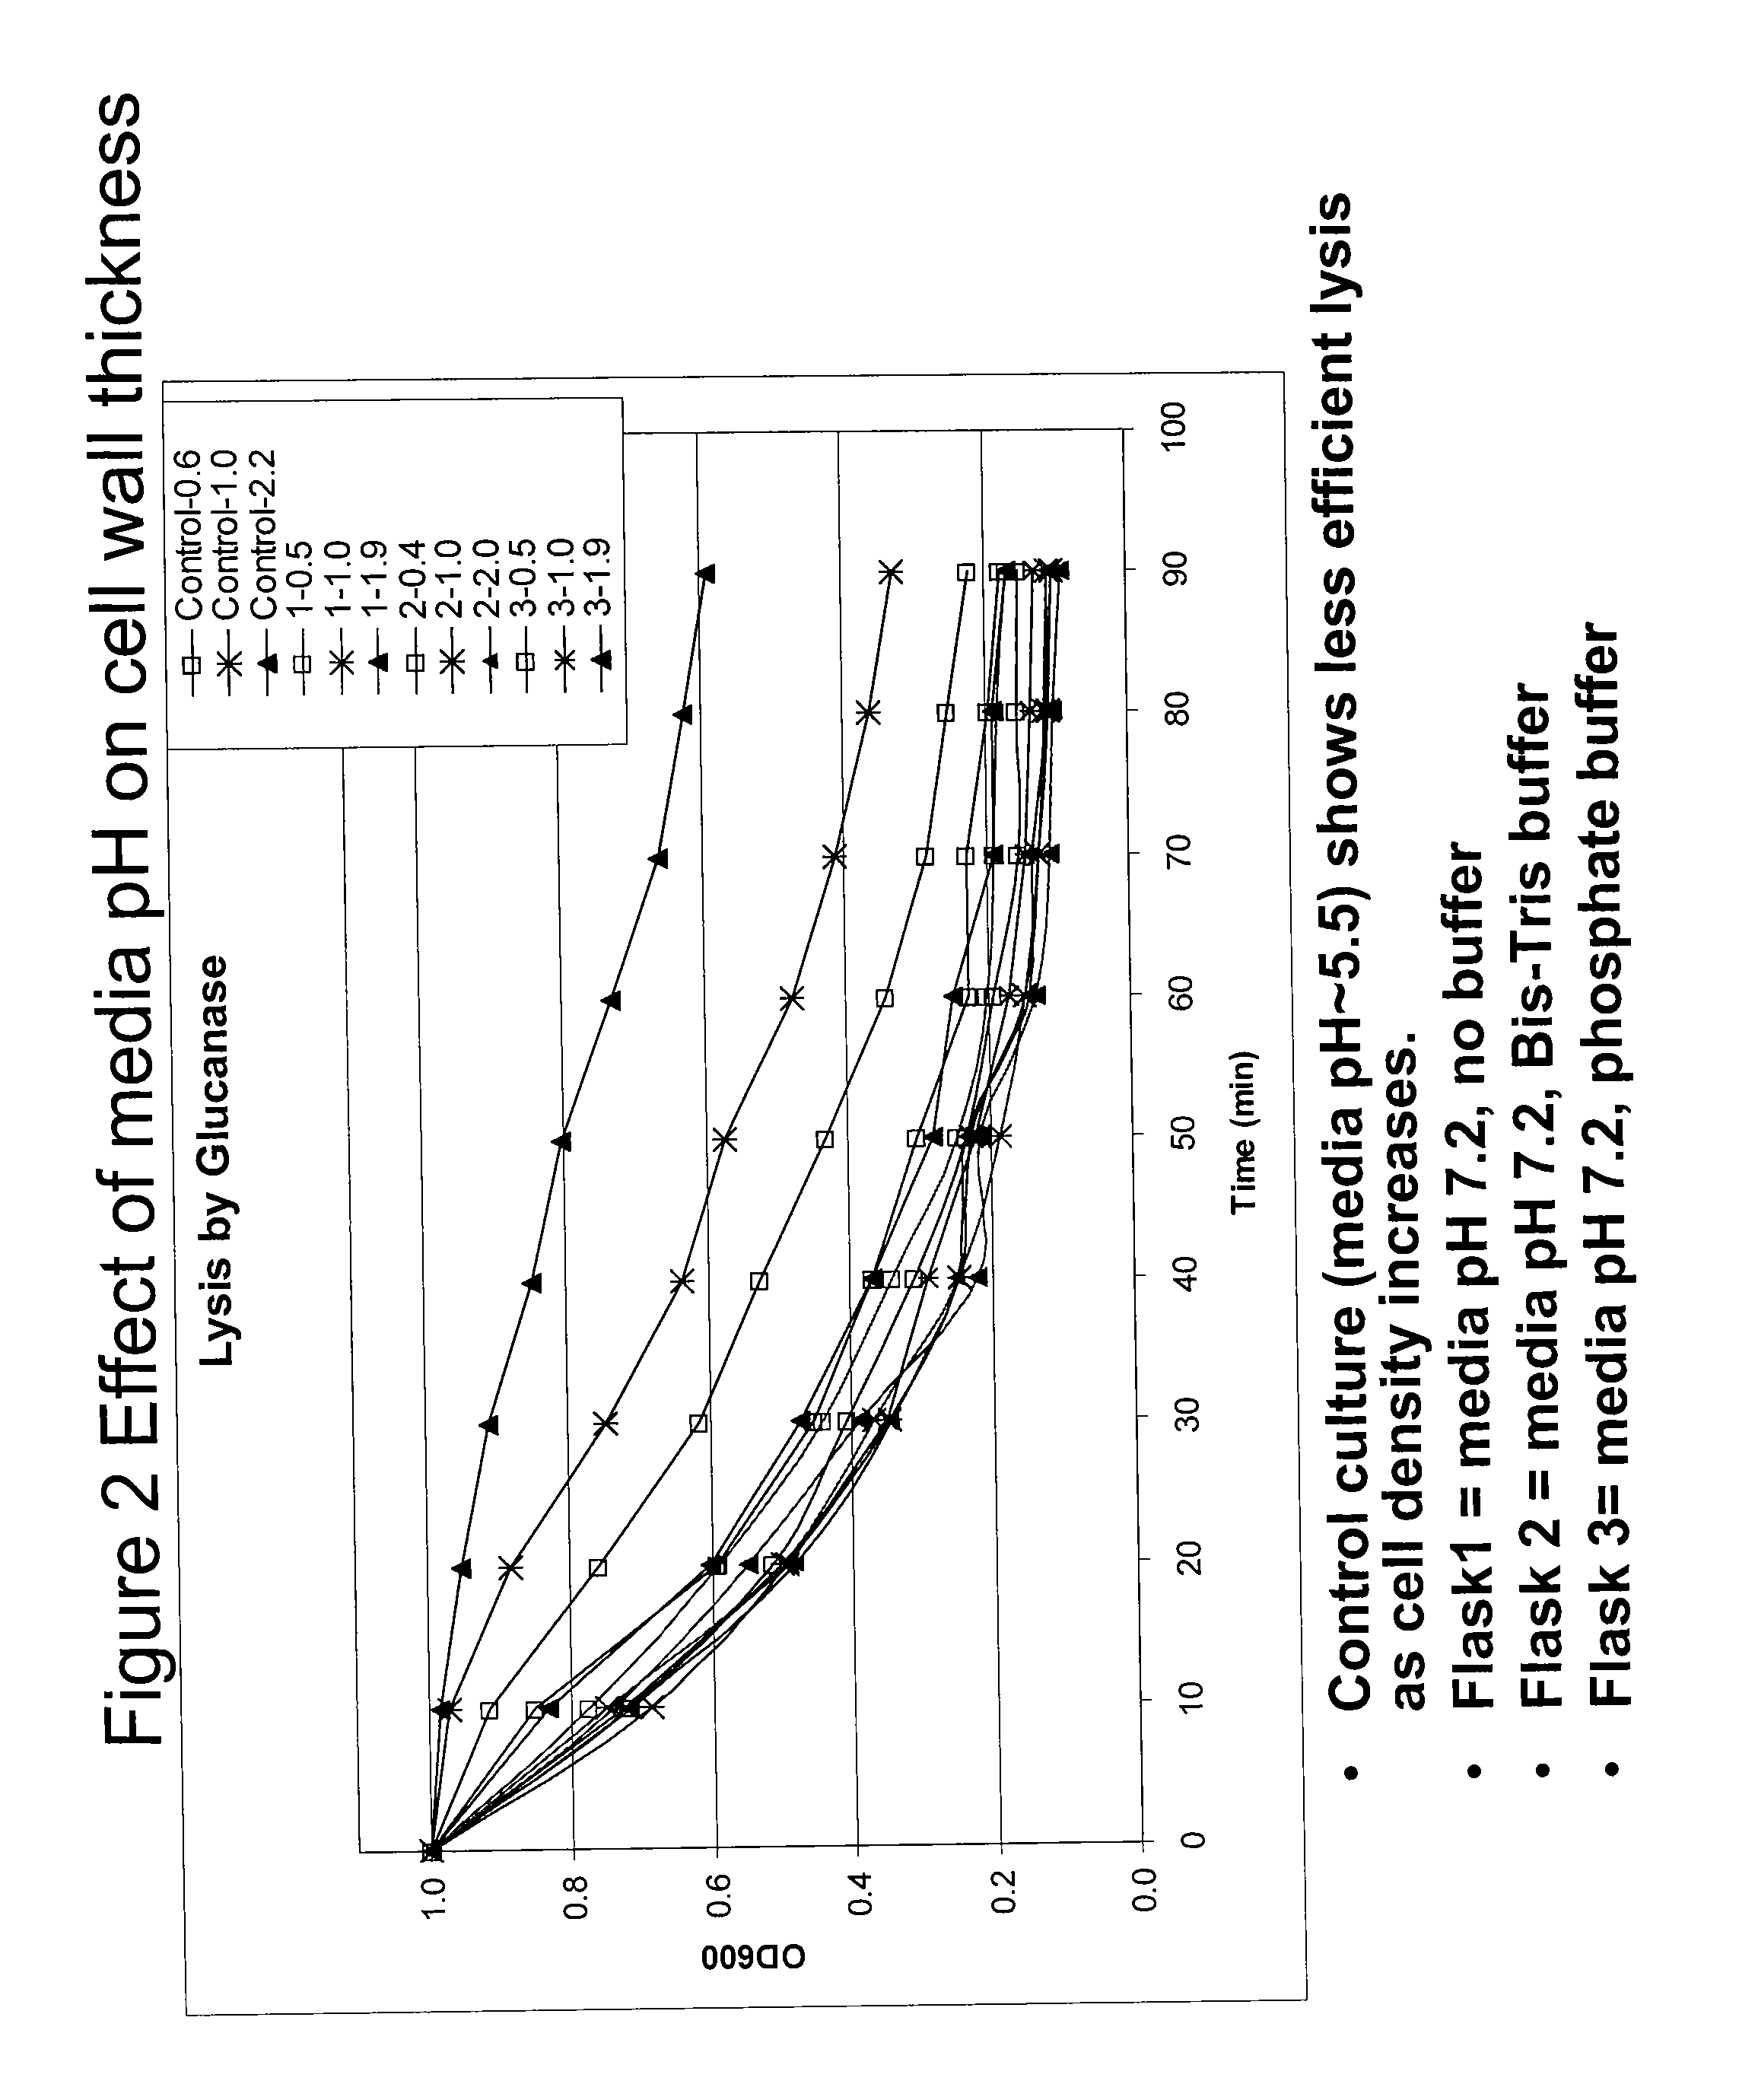 Methods for producing yeast-based vaccines